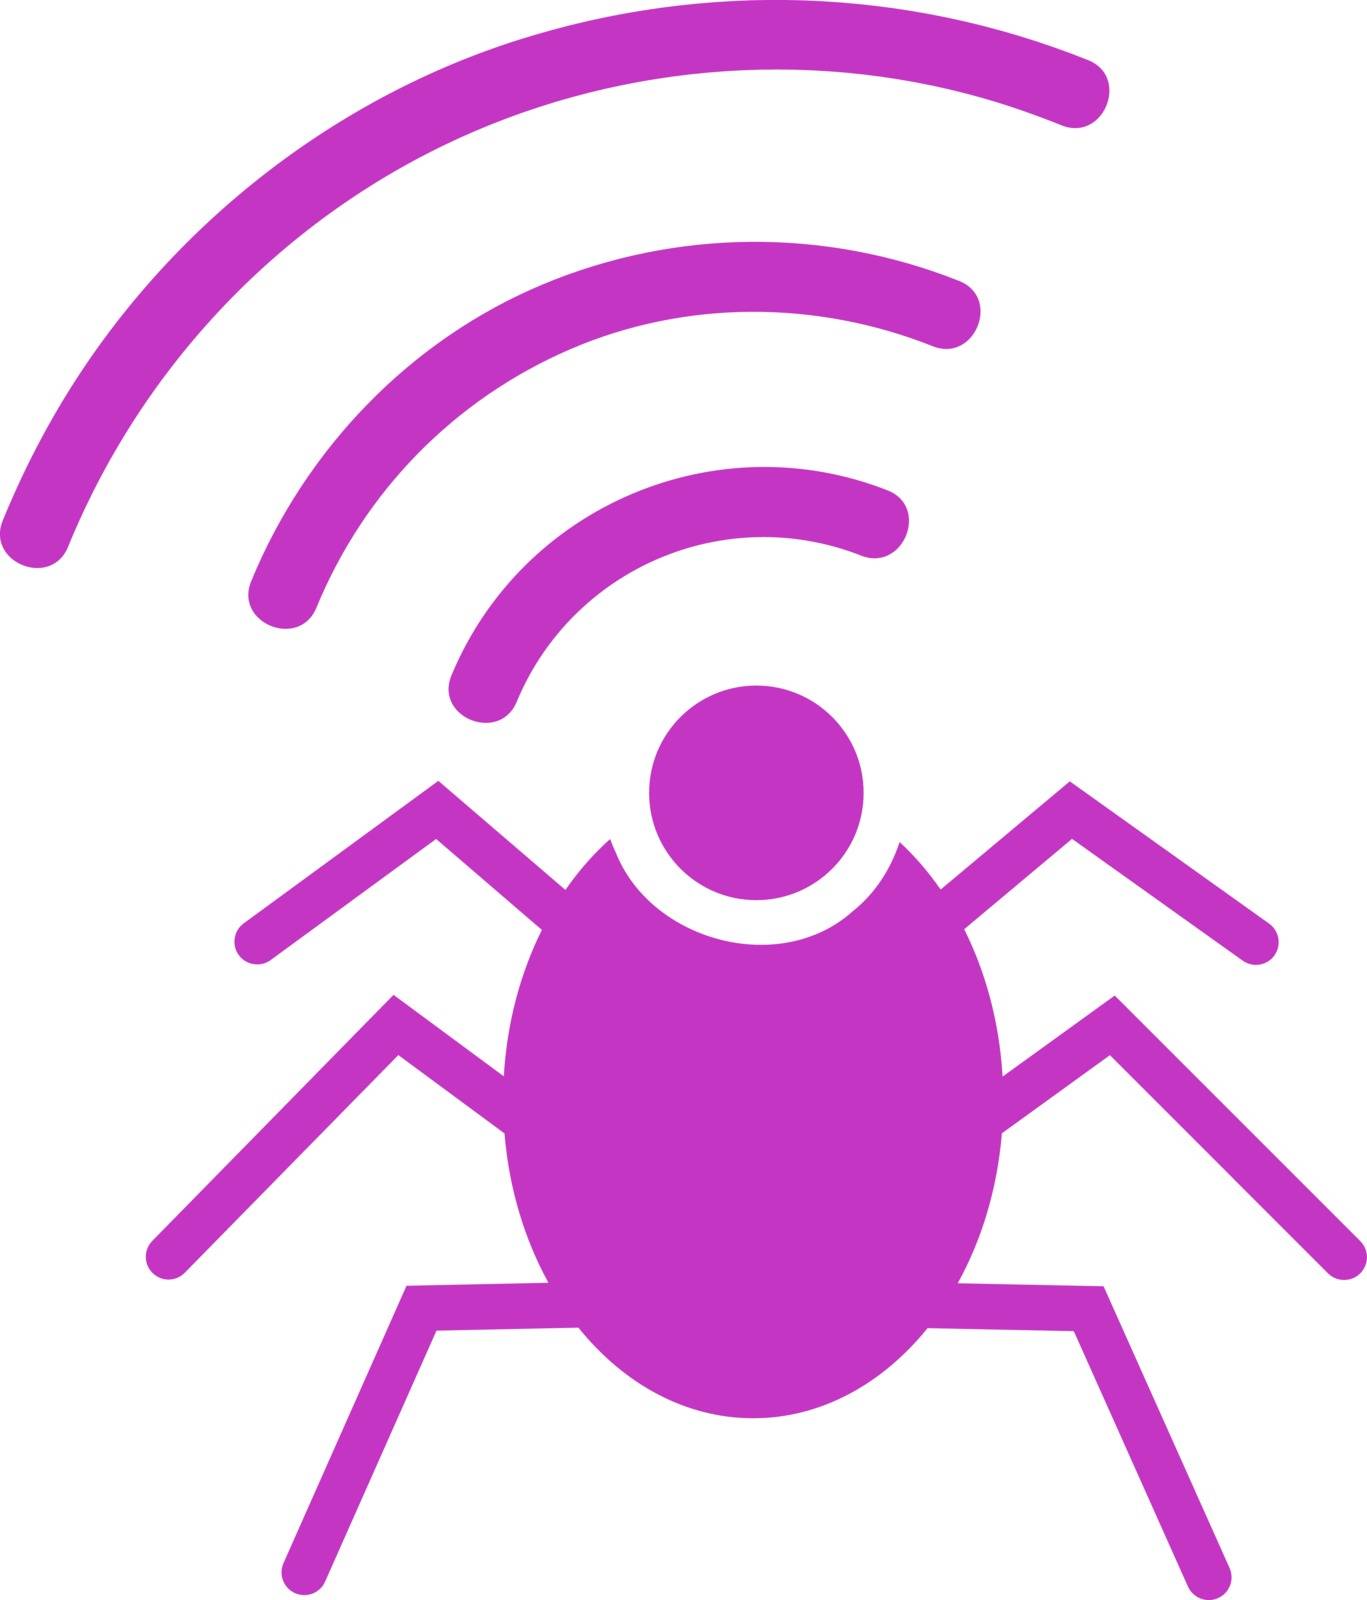 Radio spy bug icon from Business Bicolor Set. Vector style is flat symbol, violet color, rounded angles, white background.